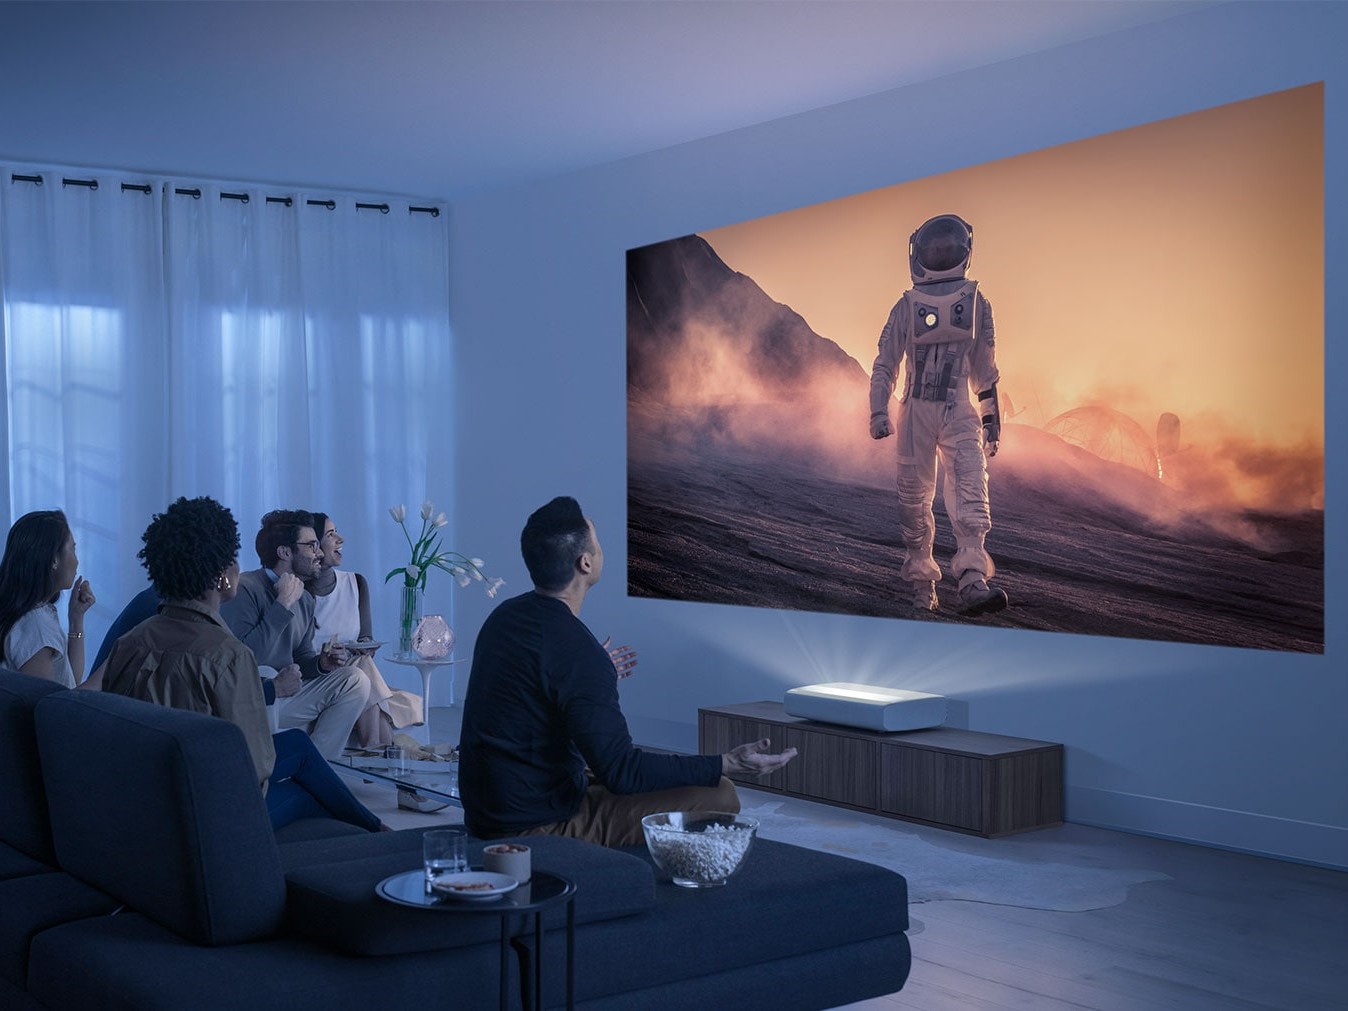 Samsung The Premiere 8K ultra-short throw laser projector with 150-in image  arrives -  News